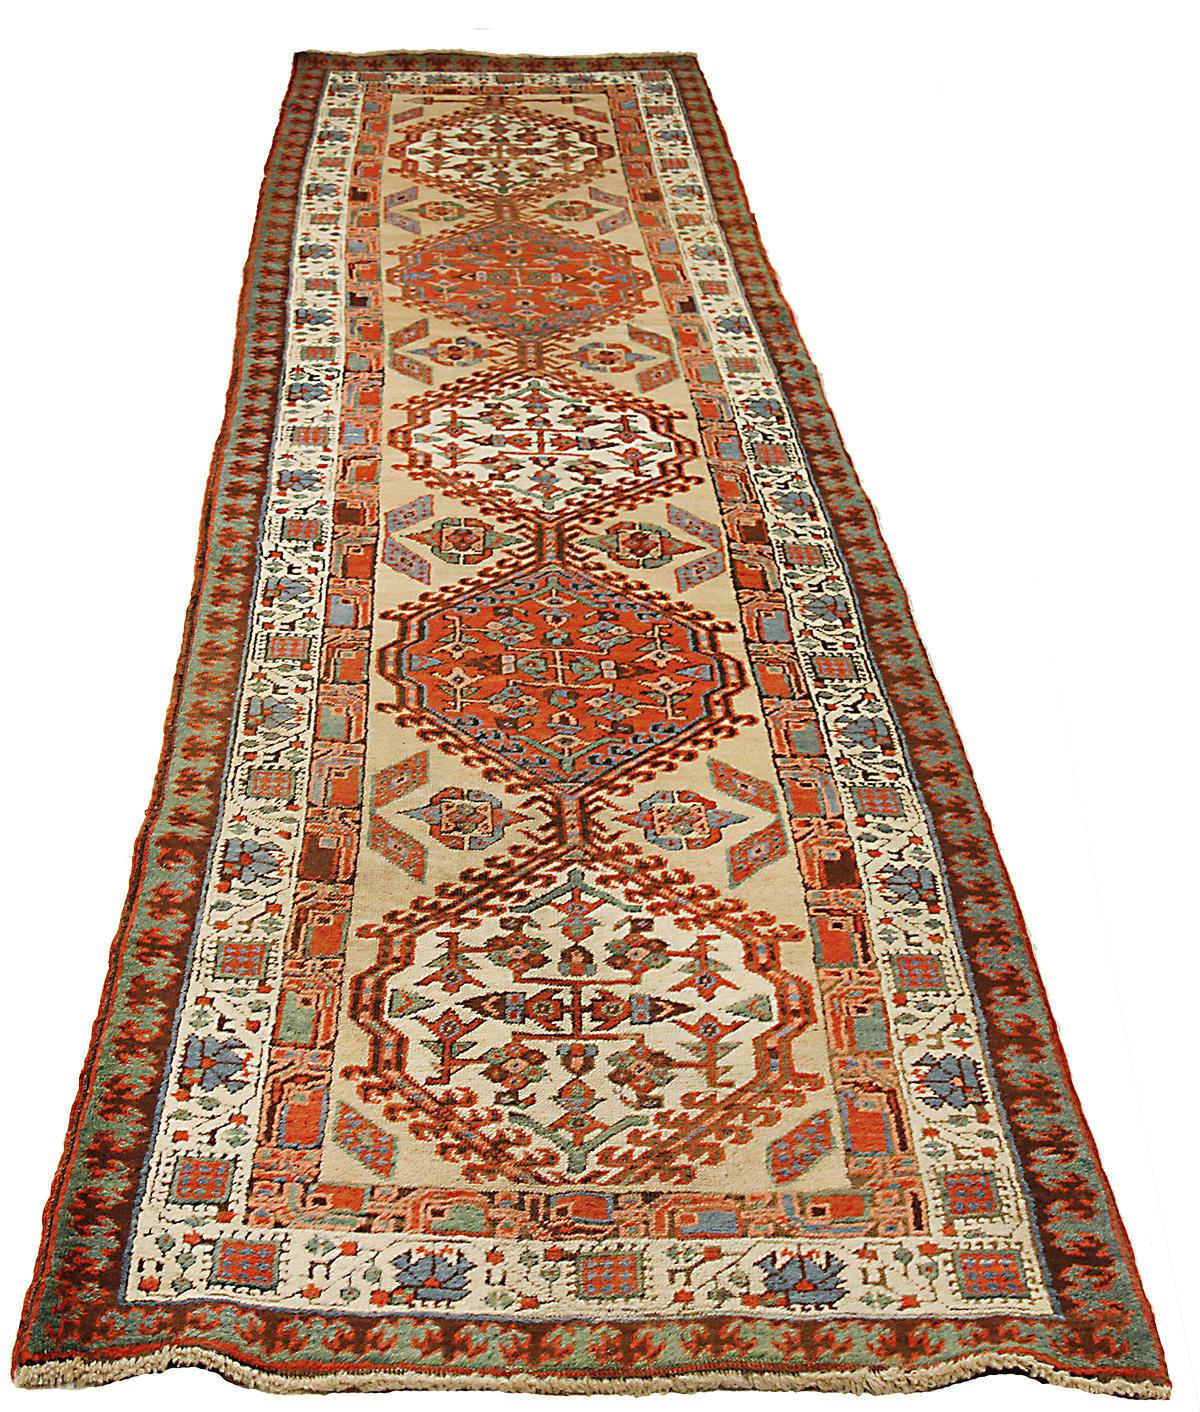 Antique Persian runner rug handwoven from the finest sheep’s wool and colored with all-natural vegetable dyes that are safe for humans and pets. It’s a traditional Azerbaijani design featuring mixed floral and geometric medallion details It